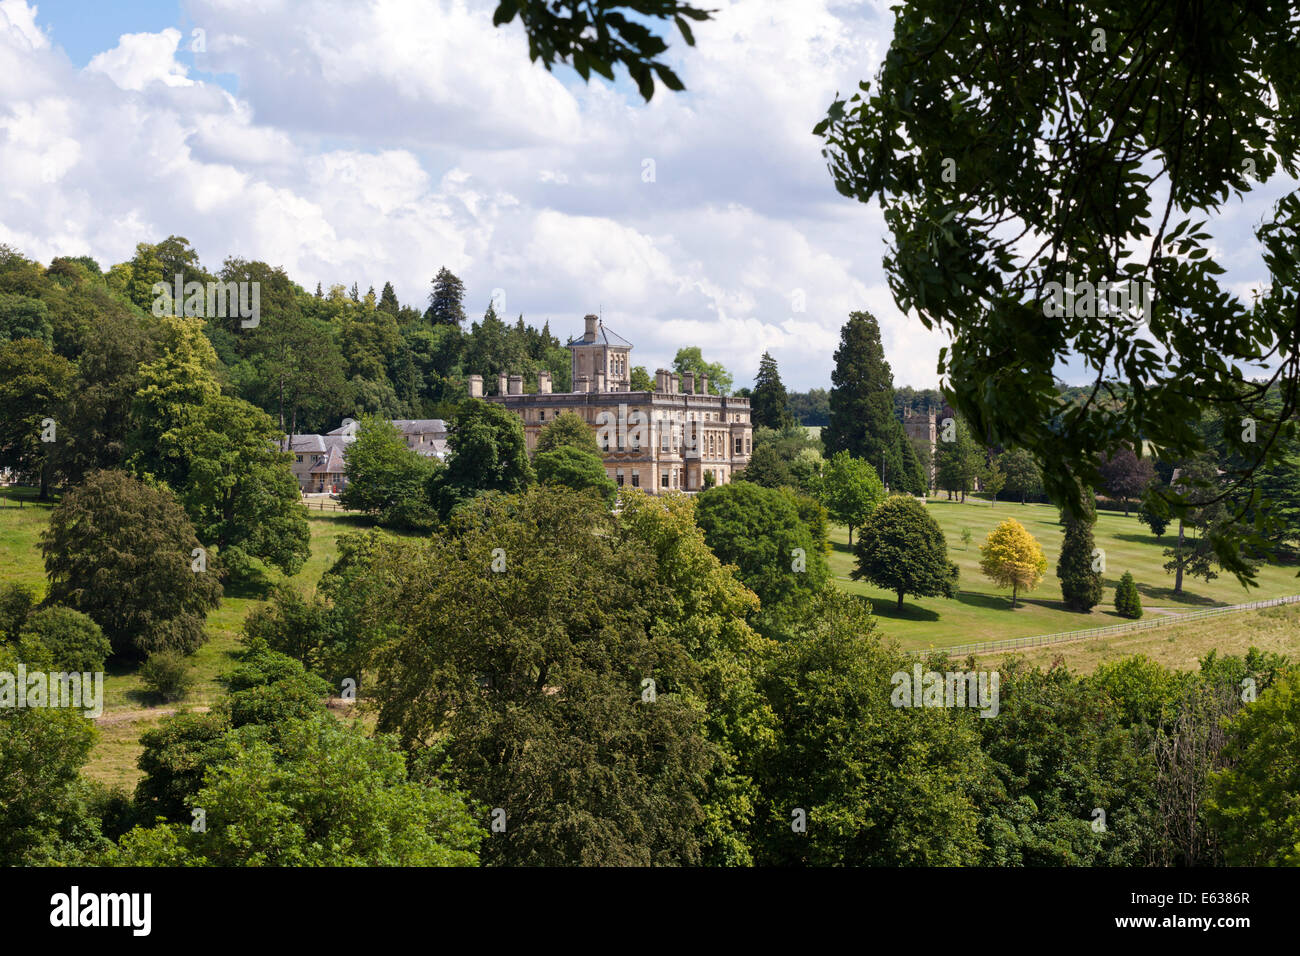 Rendcomb College - an independent, coeducational school on the Cotswolds at Rendcomb, Gloucestershire UK Stock Photo